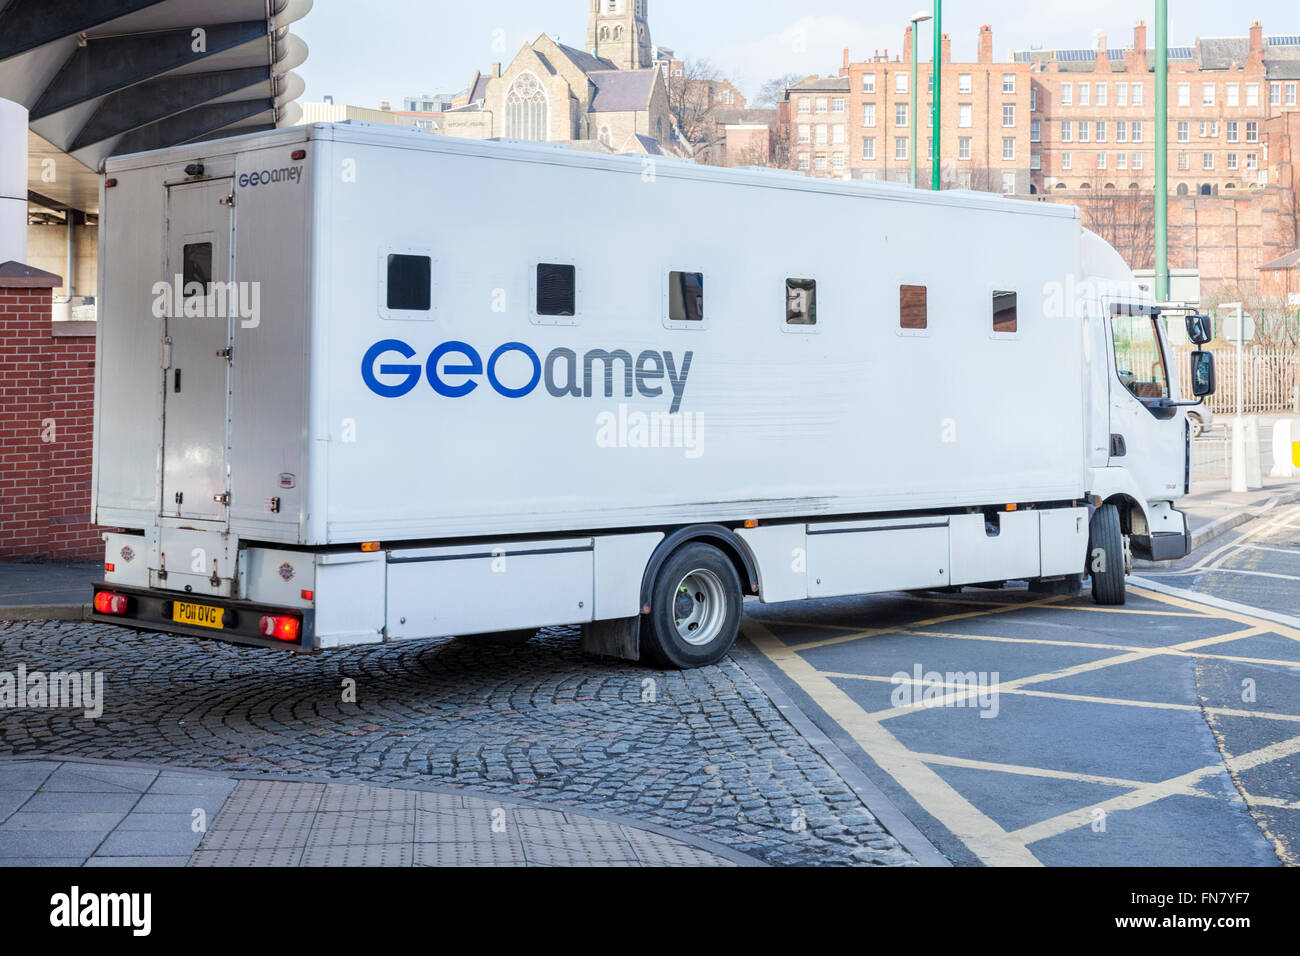 Geo amey hi-res stock photography and images - Alamy